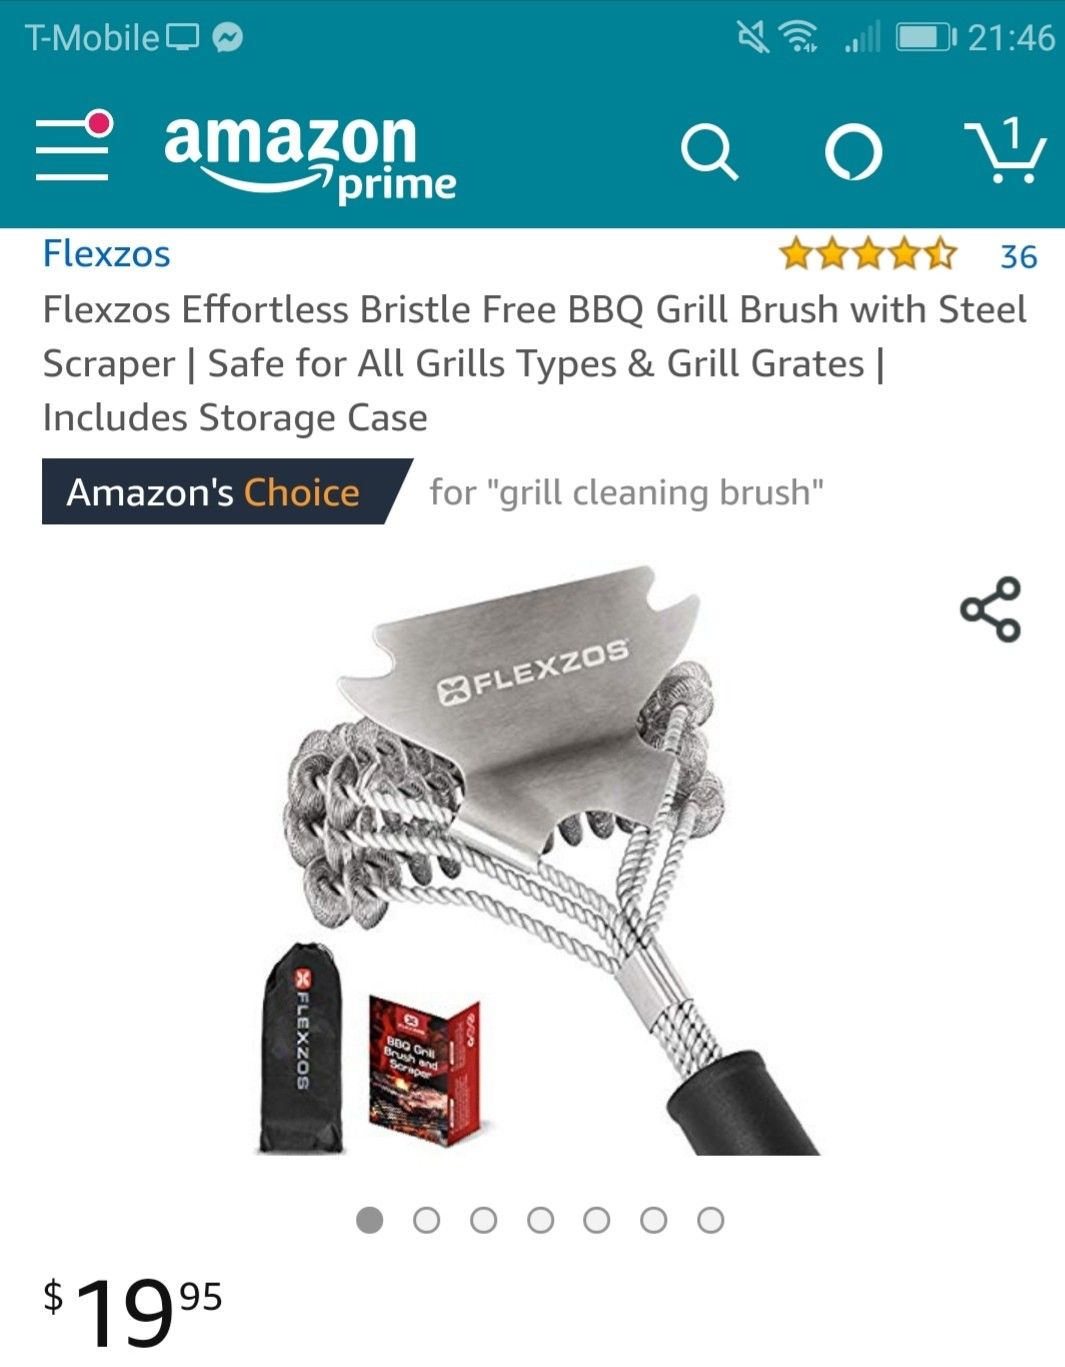 Barbeque grill brush with steel scraper- new